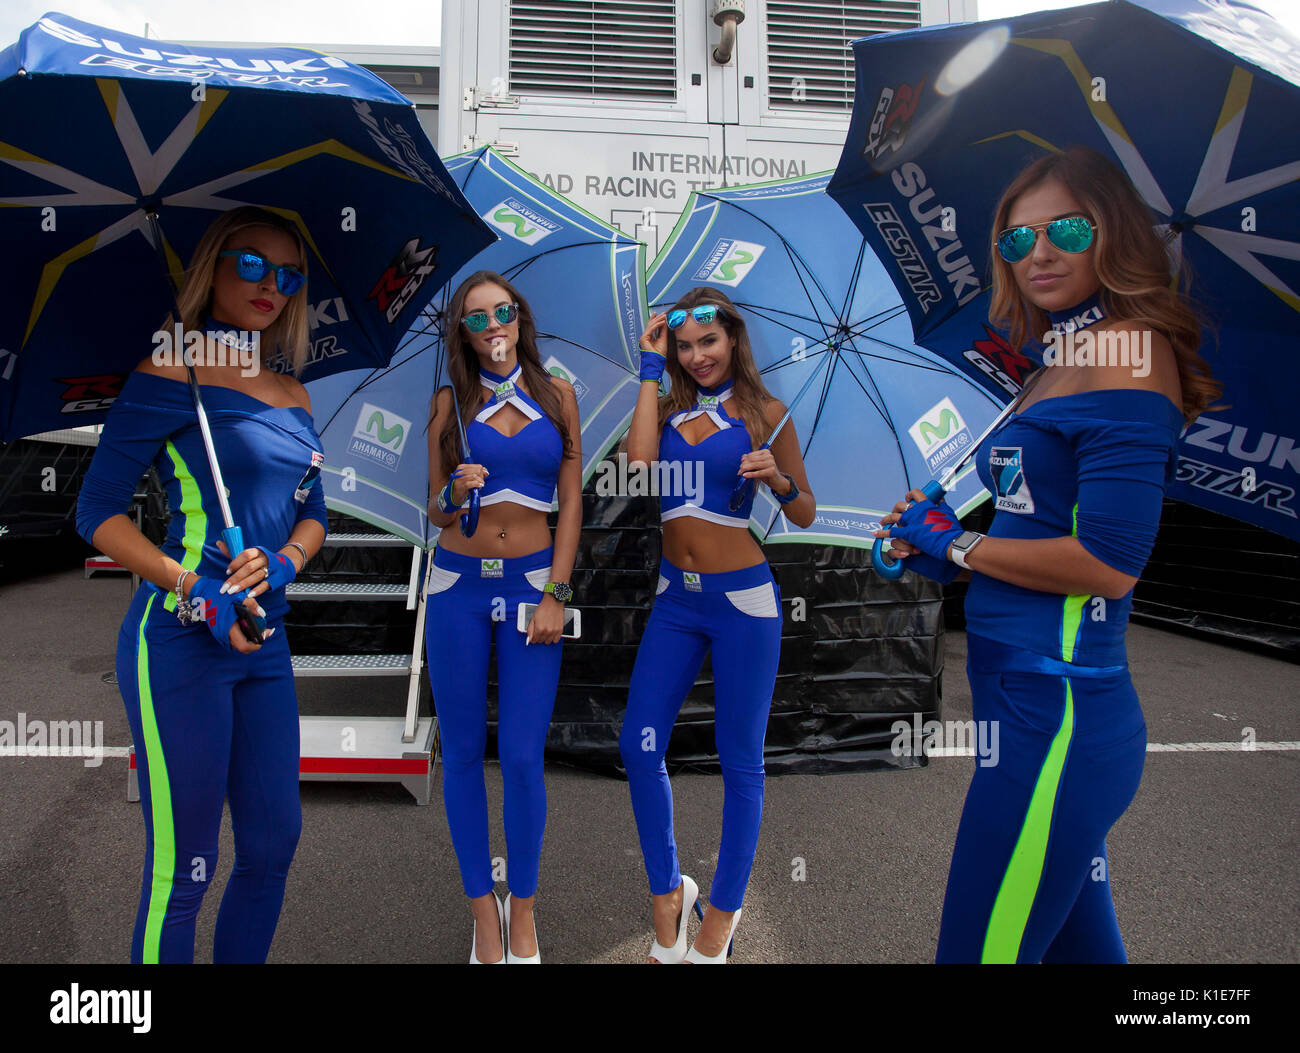 Silverstone, UK. 26th Aug, 2017. Silverstone, 26th August, 2017 Suzuki and Moviestar promotion grid gals parade in the paddock at the OCTO British MotoGP weekend Credit: Motofoto/Alamy Live News Stock Photo